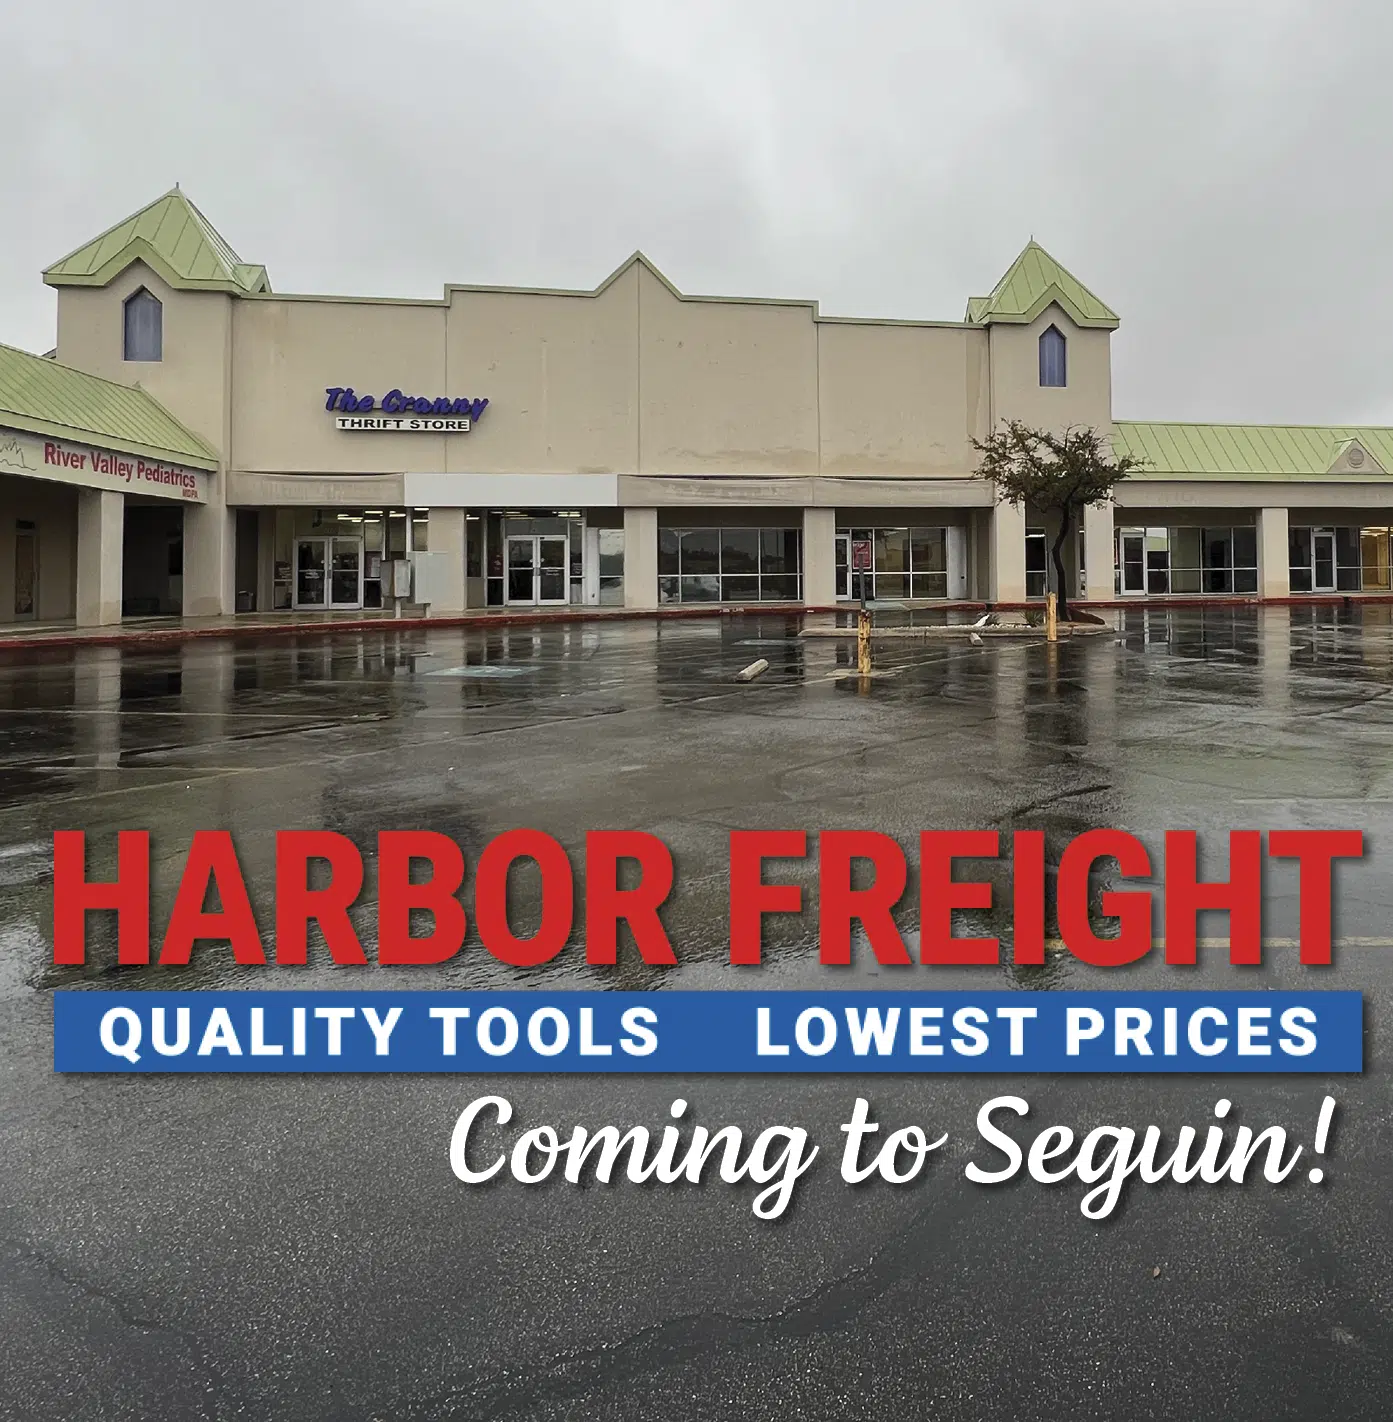 National Retailer Harbor Freight Tools Partners with TreviPay to Offer  Business and Institutional Buyers New Payment Option